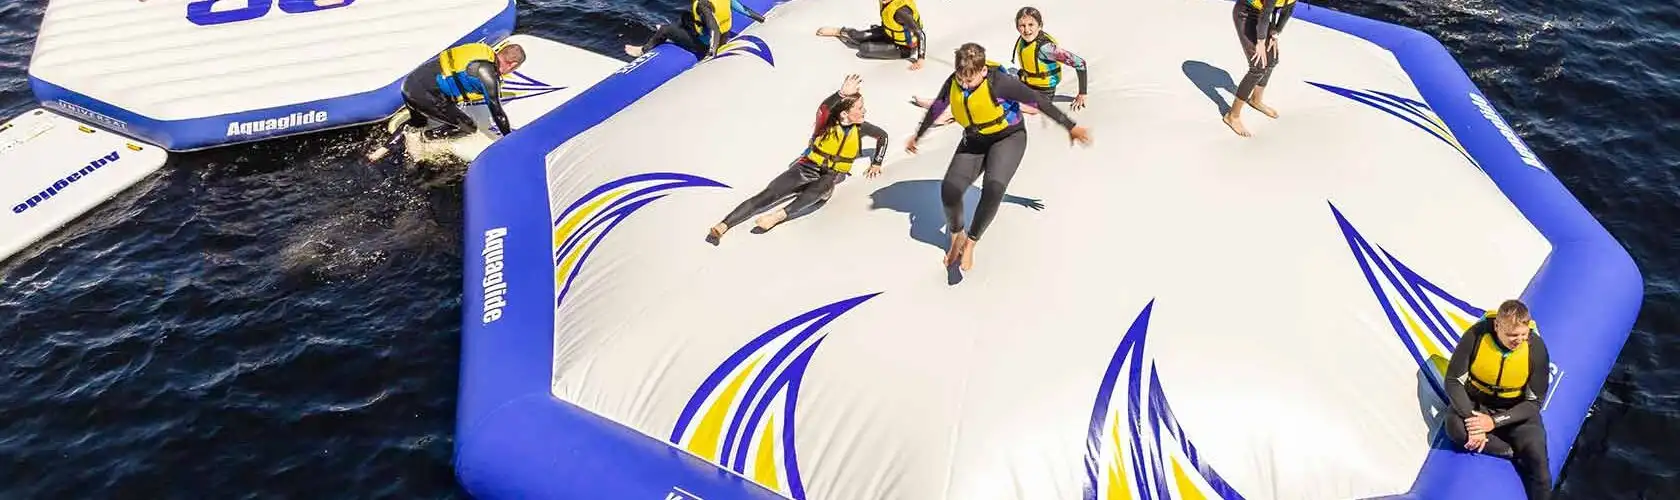 11. Experience the excitement of a gigantic bouncing dome—fun for all ages! Work together to bounce Dad off the side or risk getting blasted yourself! It's trampoline fun with a twist. Kaos West Lake Aqua Park